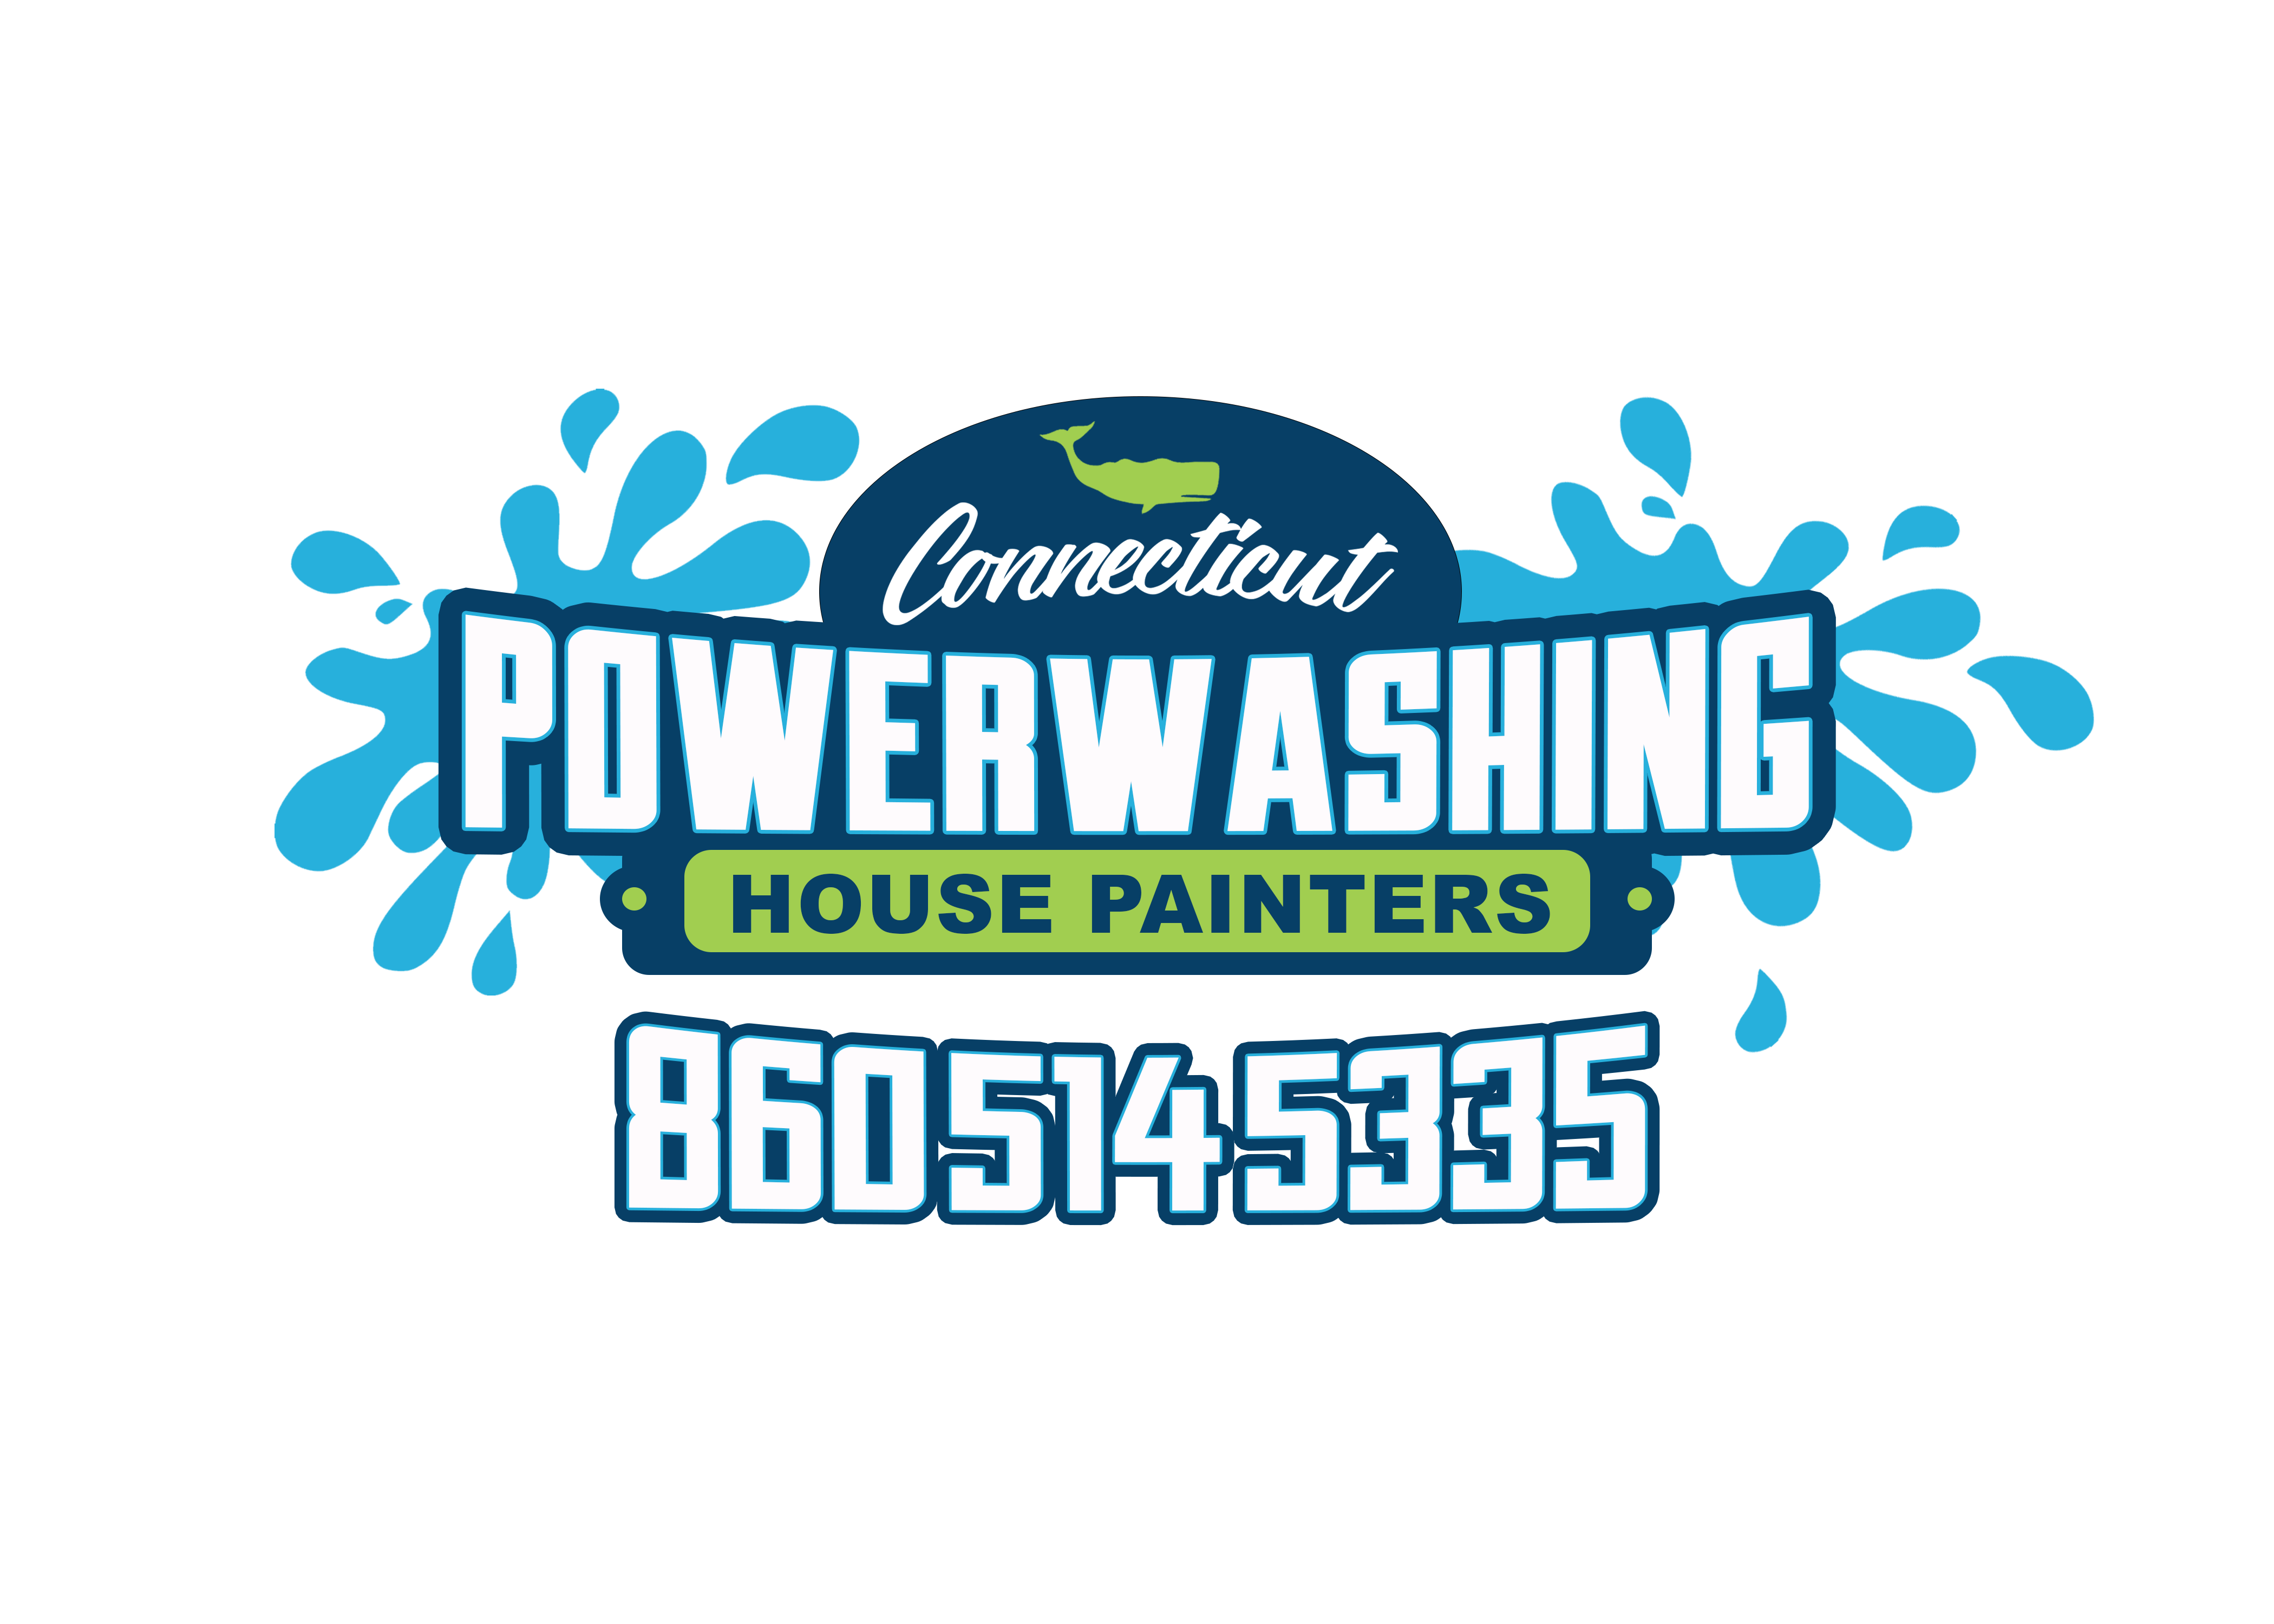 Connecticut Power Washing Service